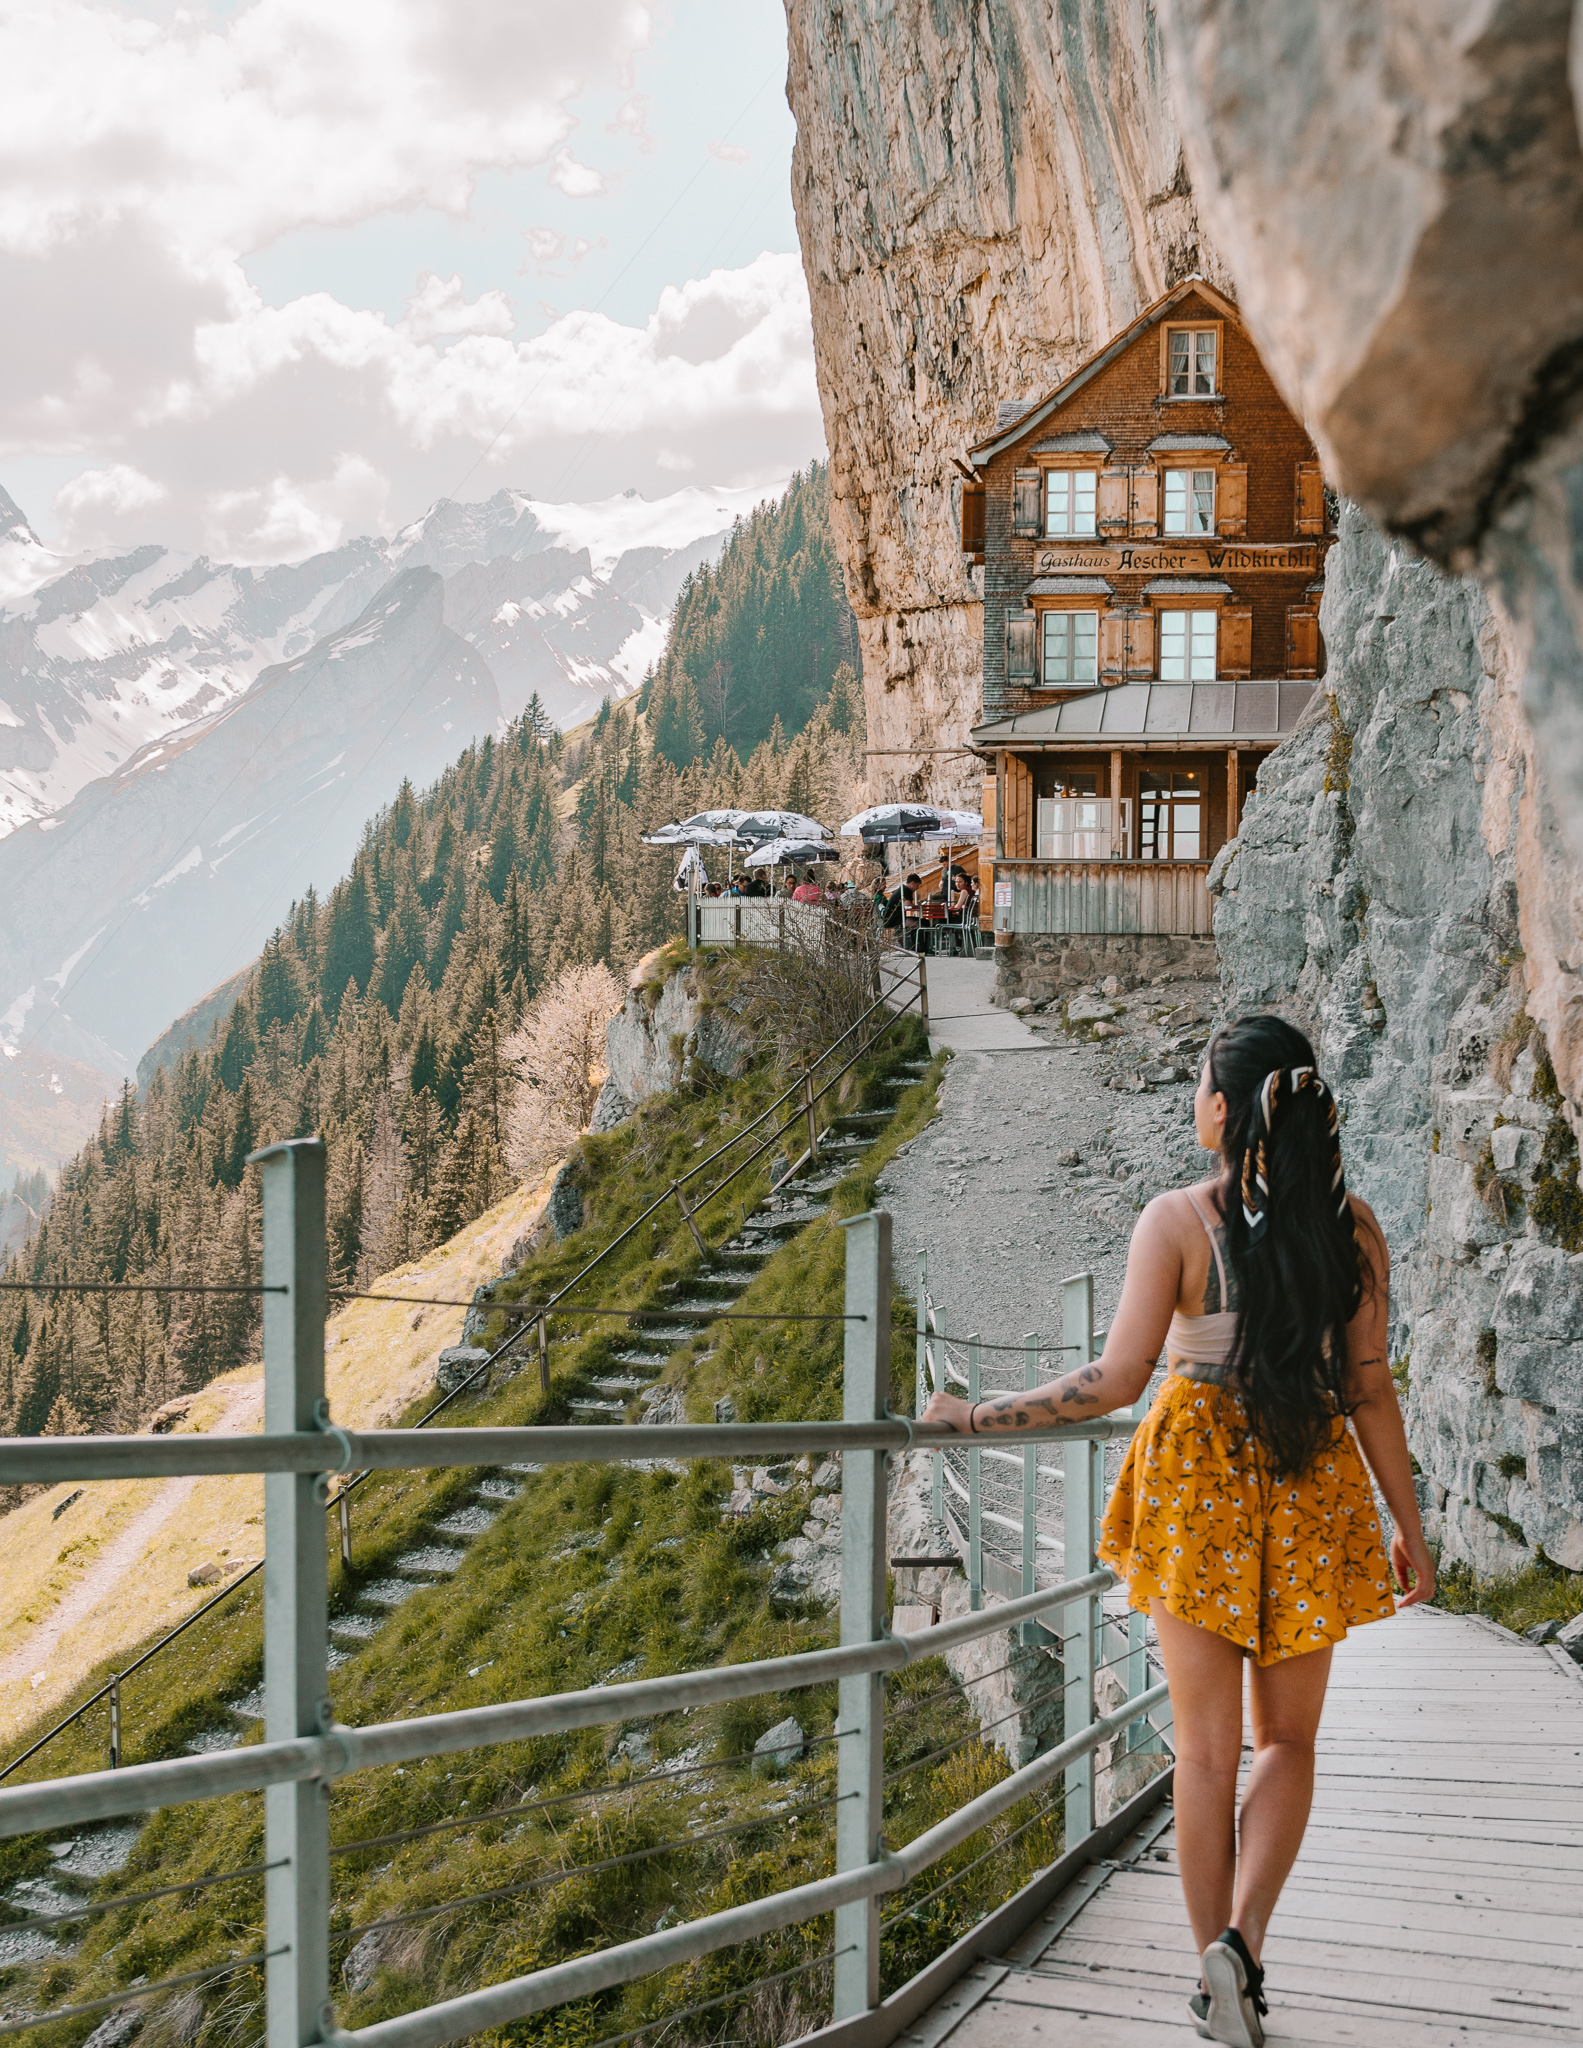 A girl on the walking path in front of the Aescher Guesthouse in switzerland